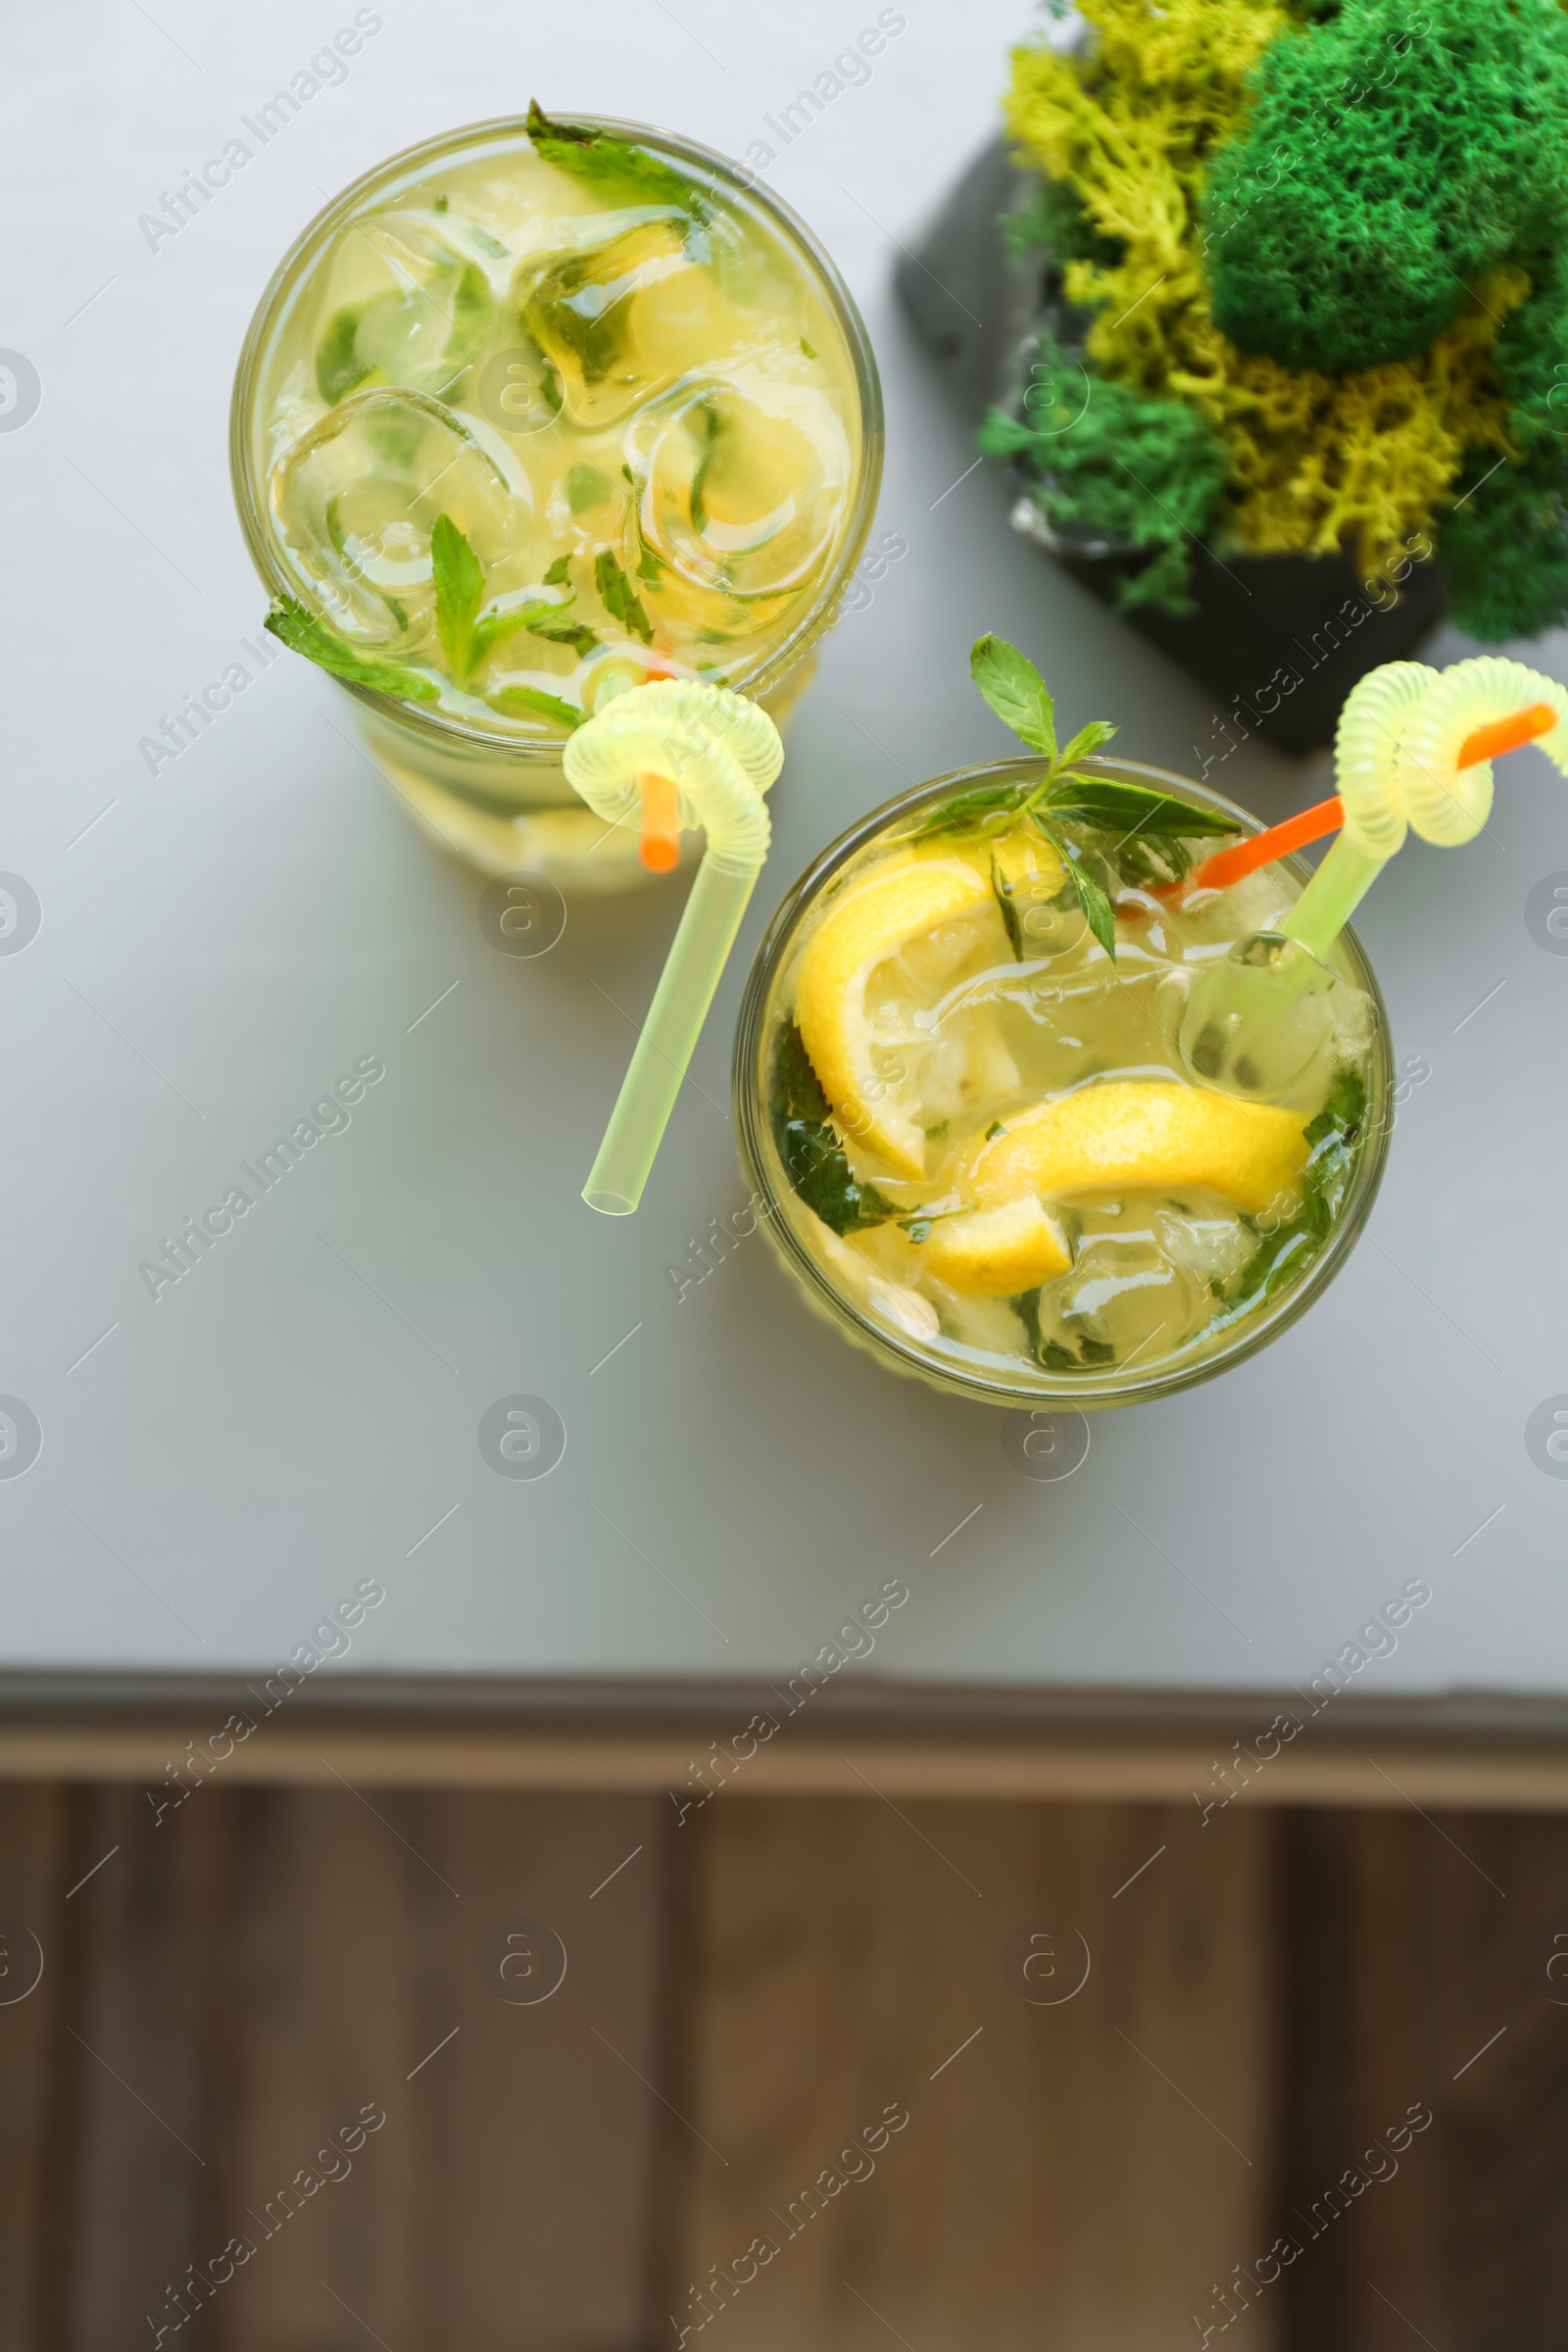 Photo of Glasses of iced lemonade on table, top view